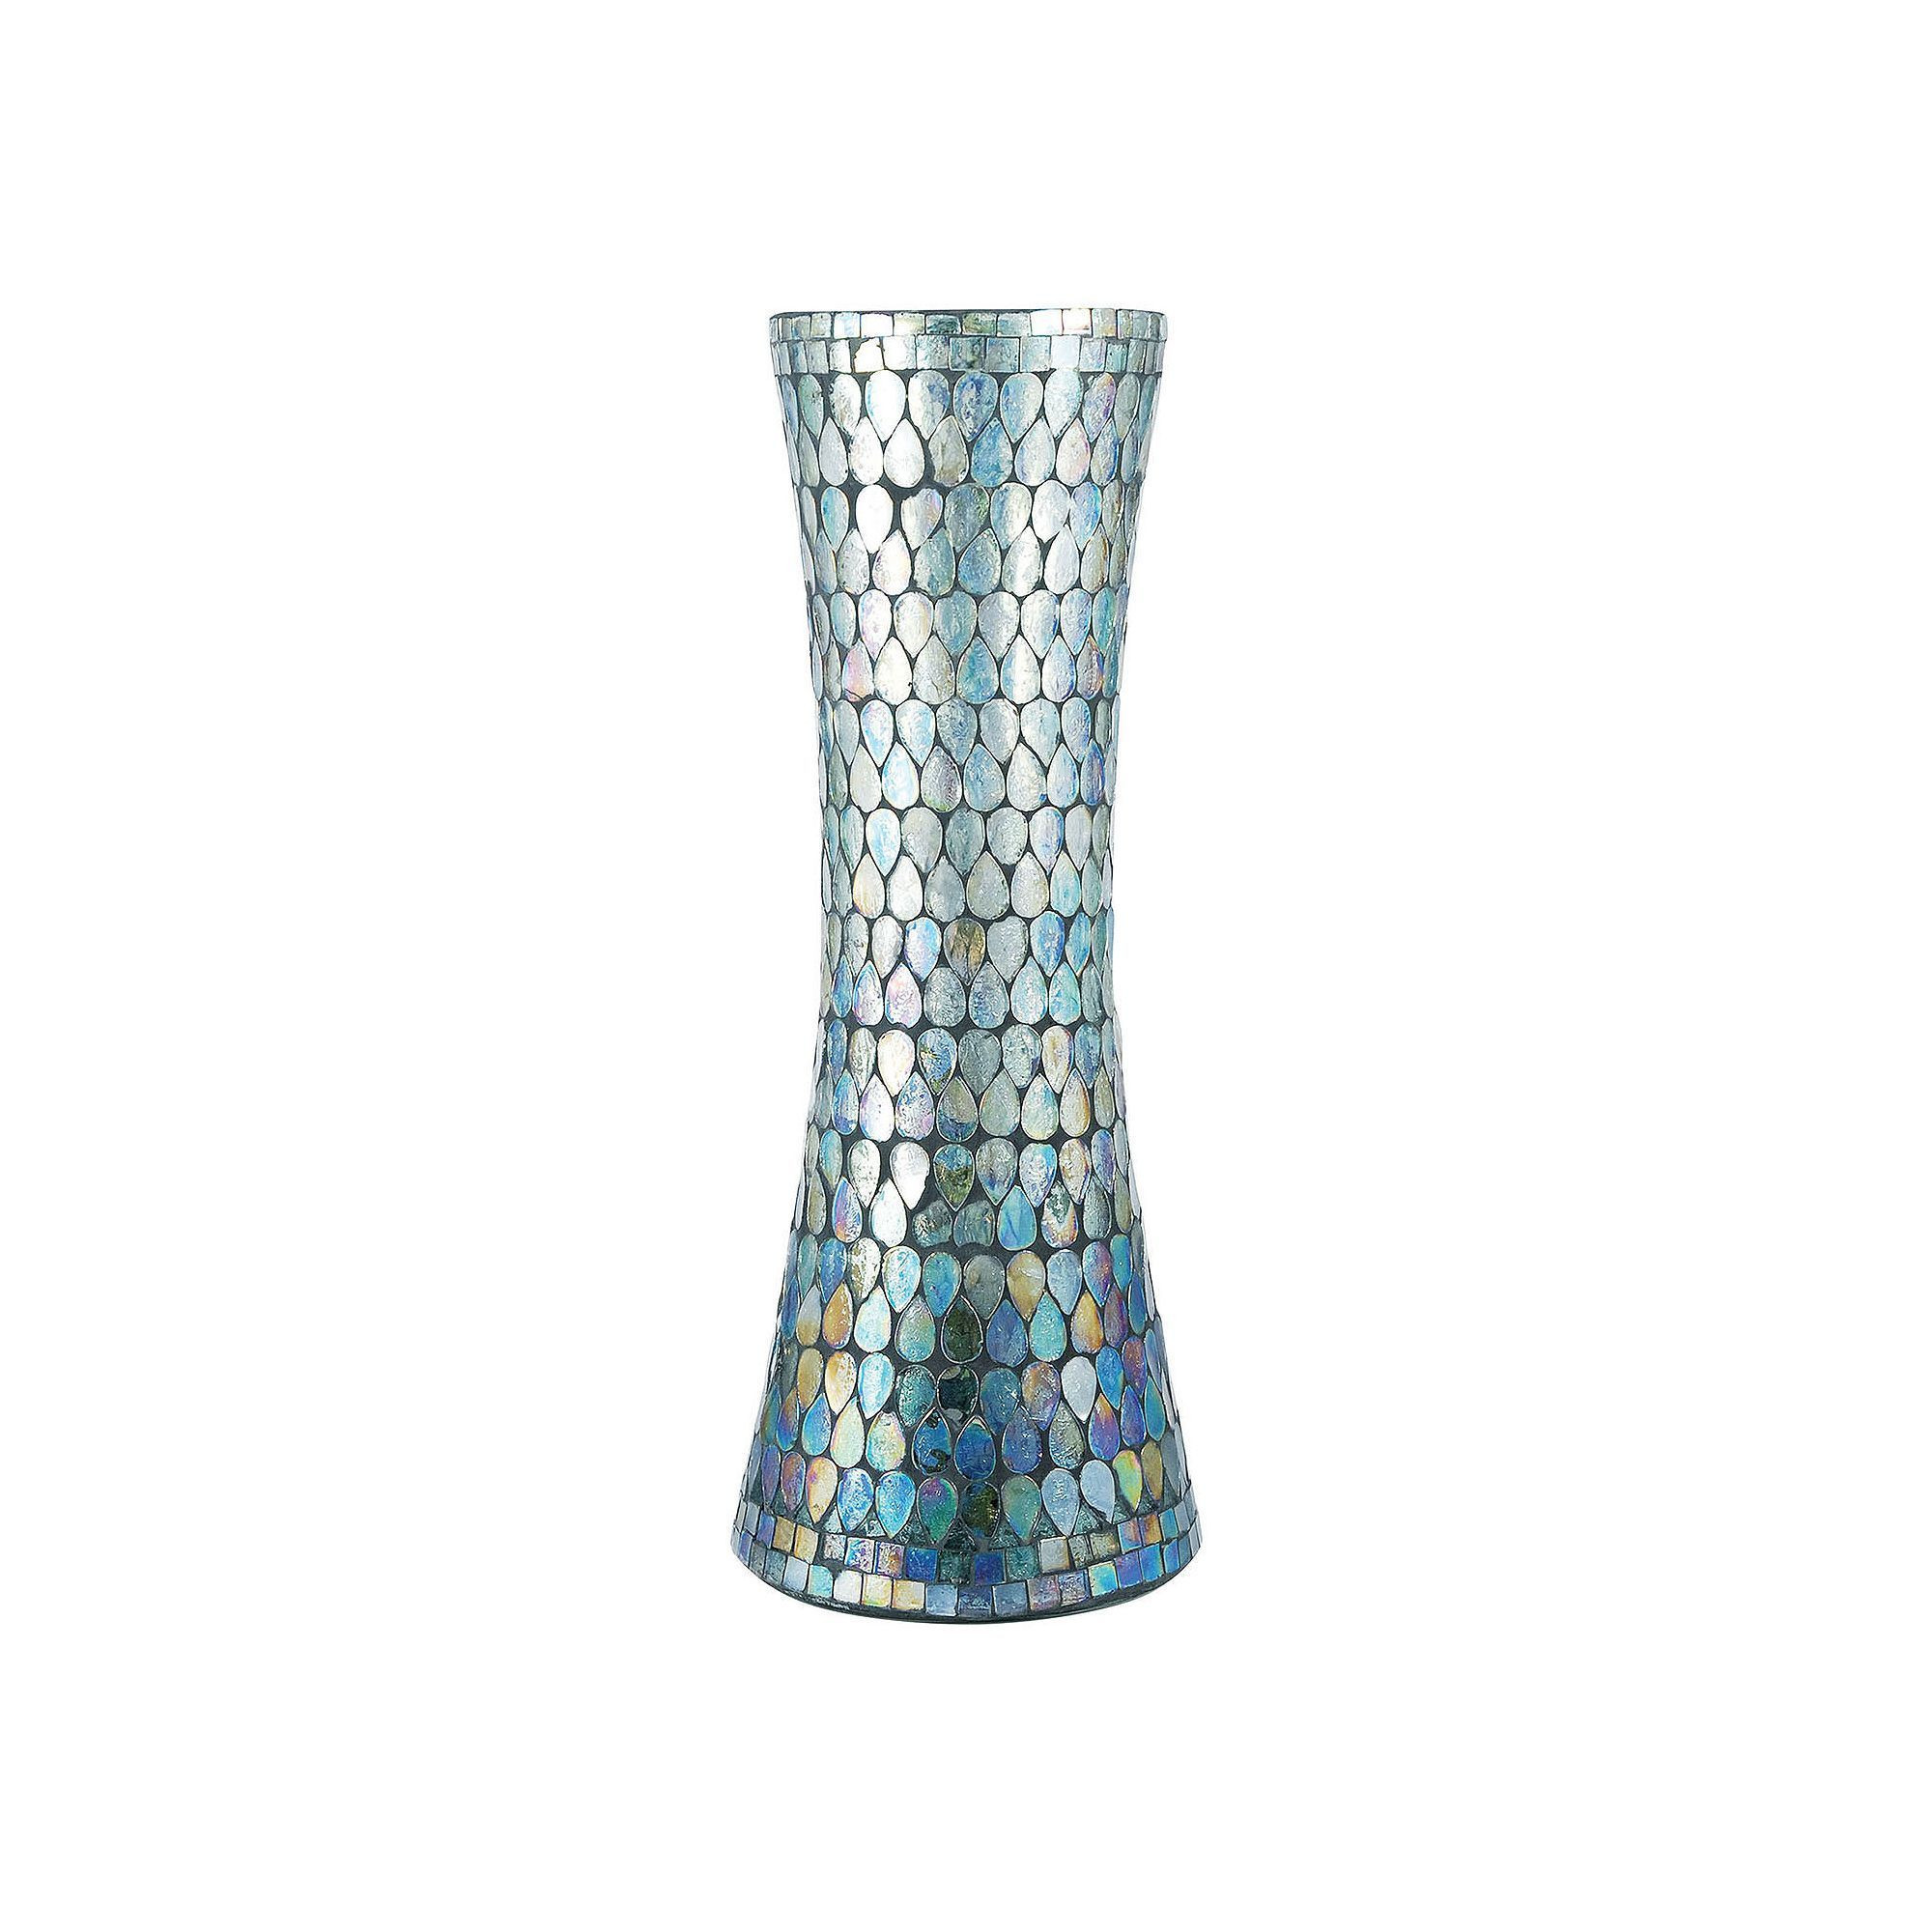 21 Fantastic Mirror Mosaic Vases for Sale 2024 free download mirror mosaic vases for sale of pomeroy shimmer mosaic vase mosaic vase and products for pomeroy shimmer mosaic vase